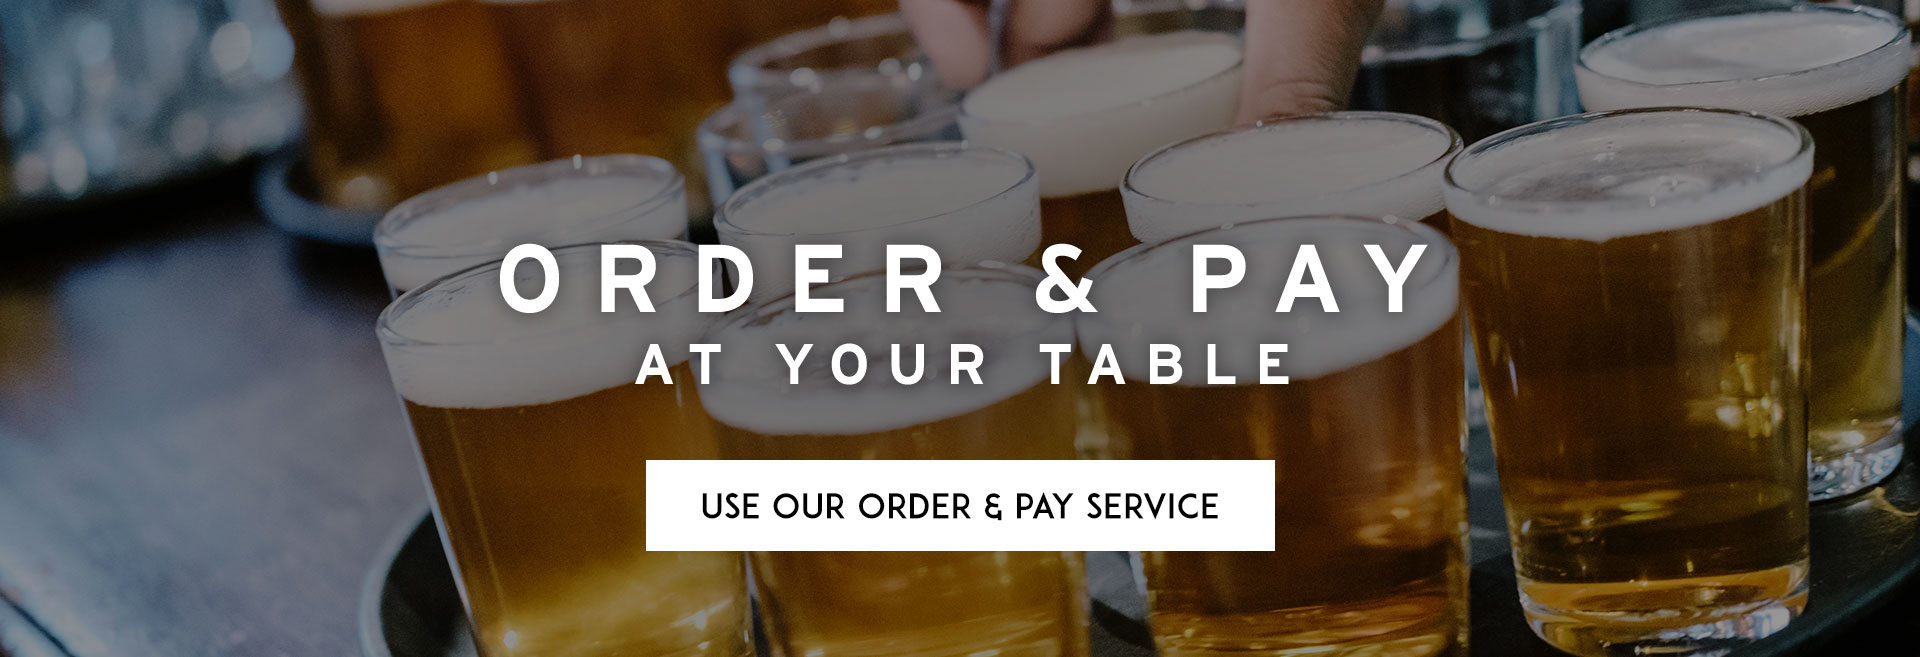 Order at table at The White Horse hero